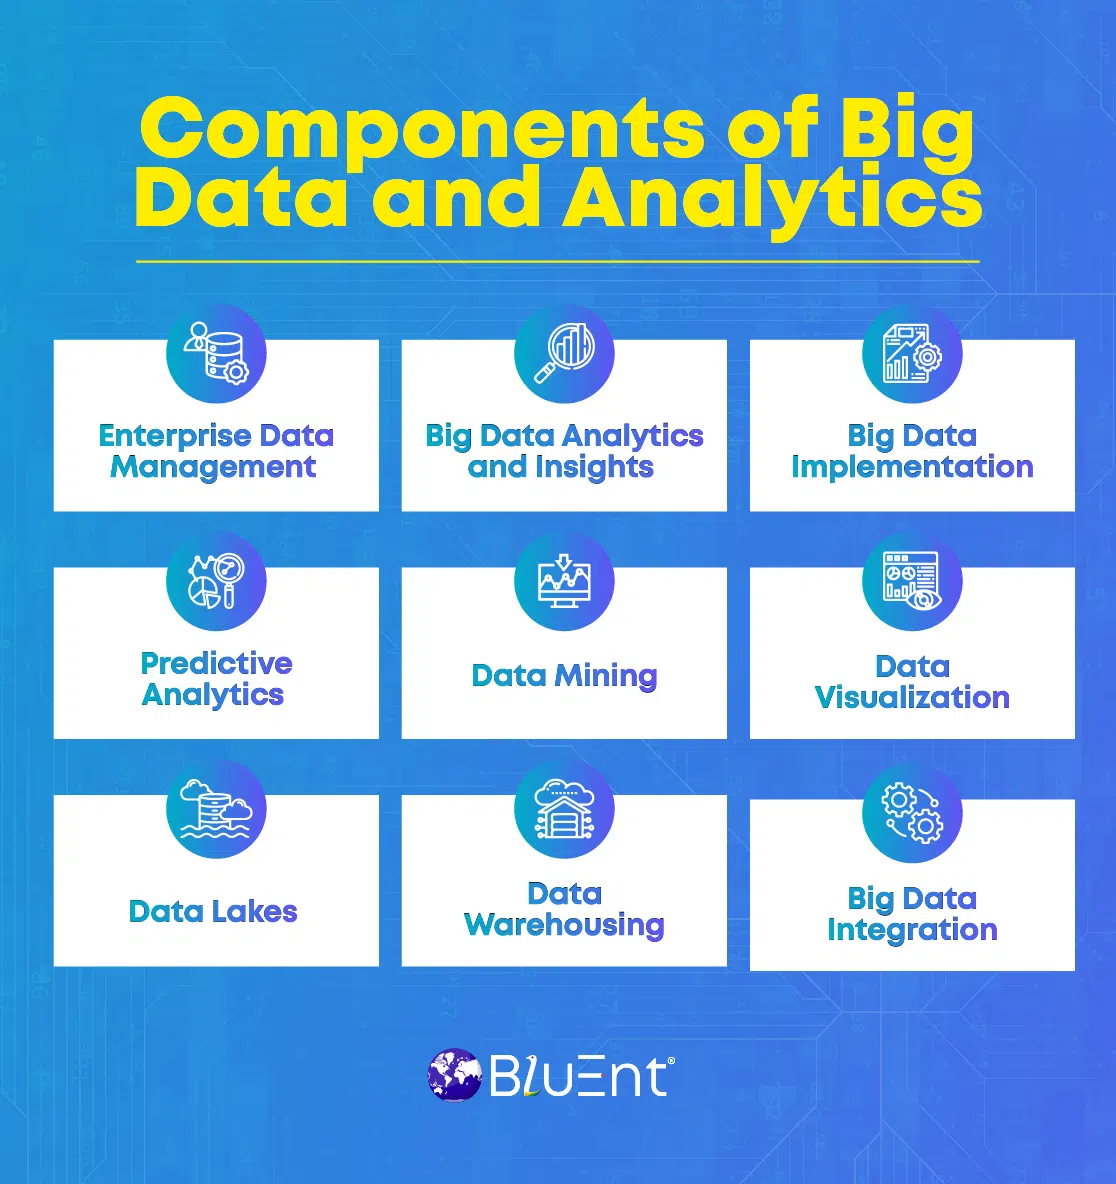 Components of Big Data and Analytics